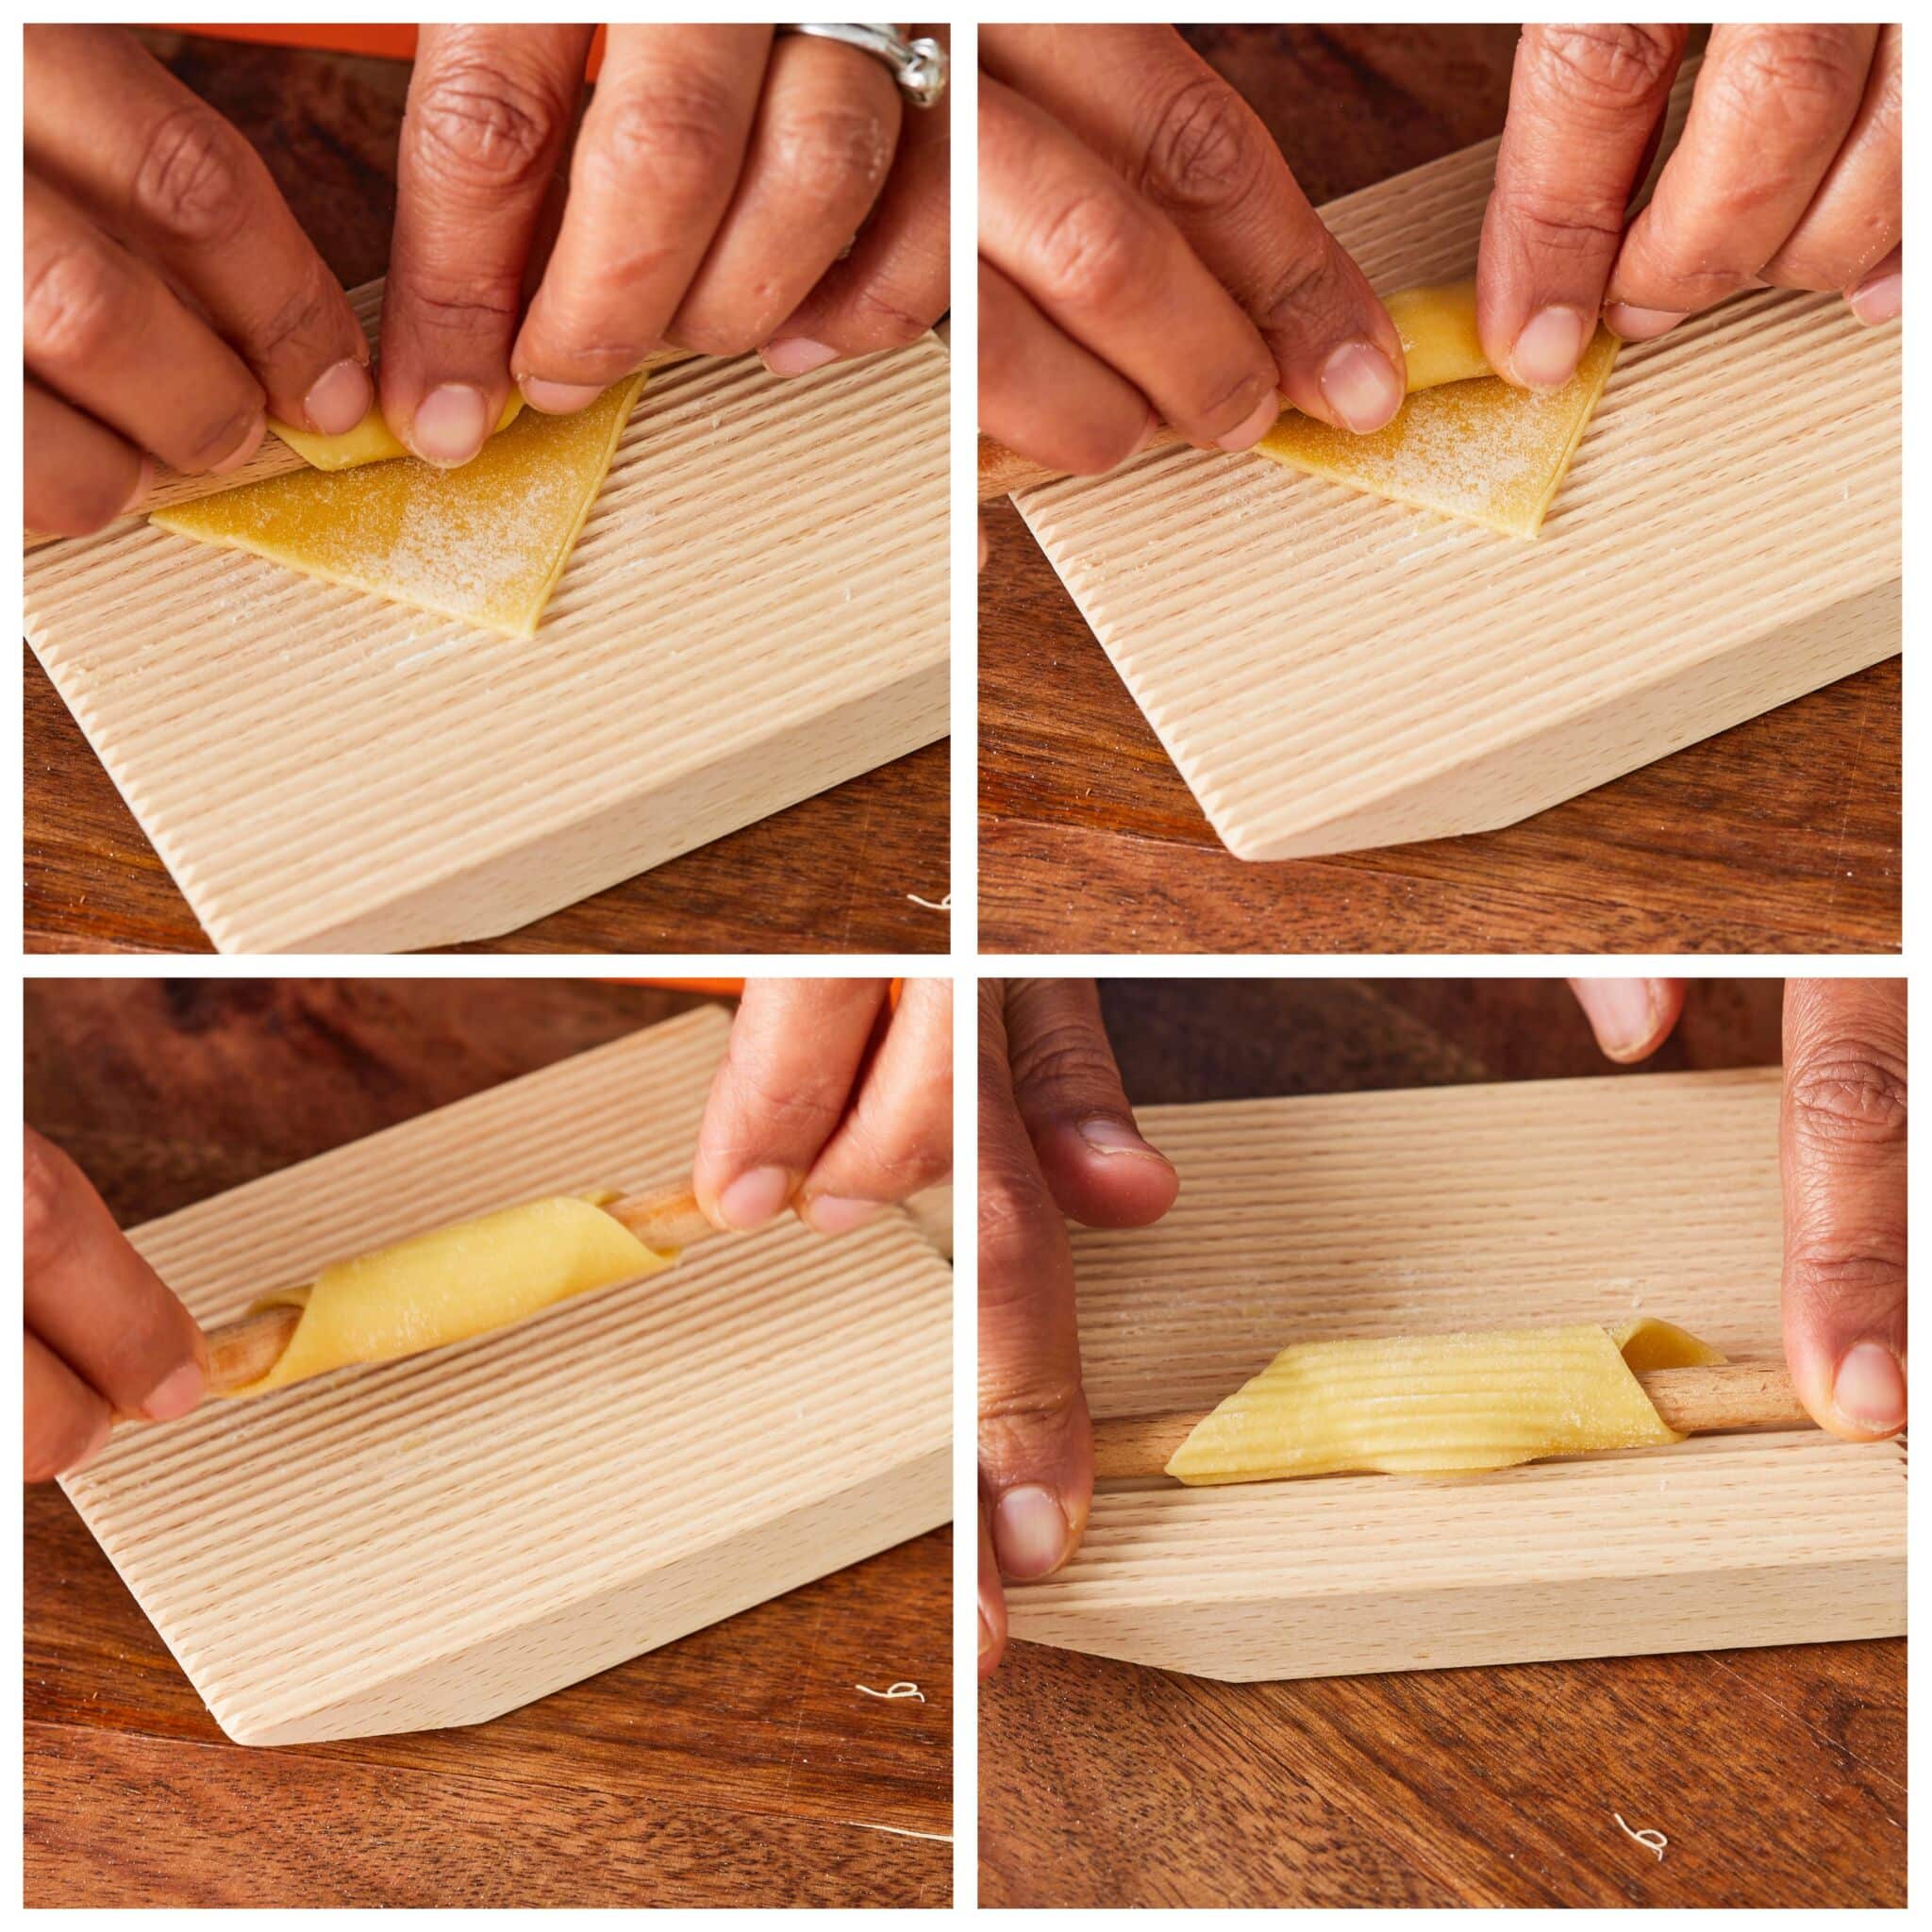 How to make Penne Pasta: Place the dowel on the square of dough, form the dough around the dowel, and roll and press on the gnocchi board to make ridges. The tube will have a point at both ends. While the dough is around the dowel, press the ends together to make a seam.